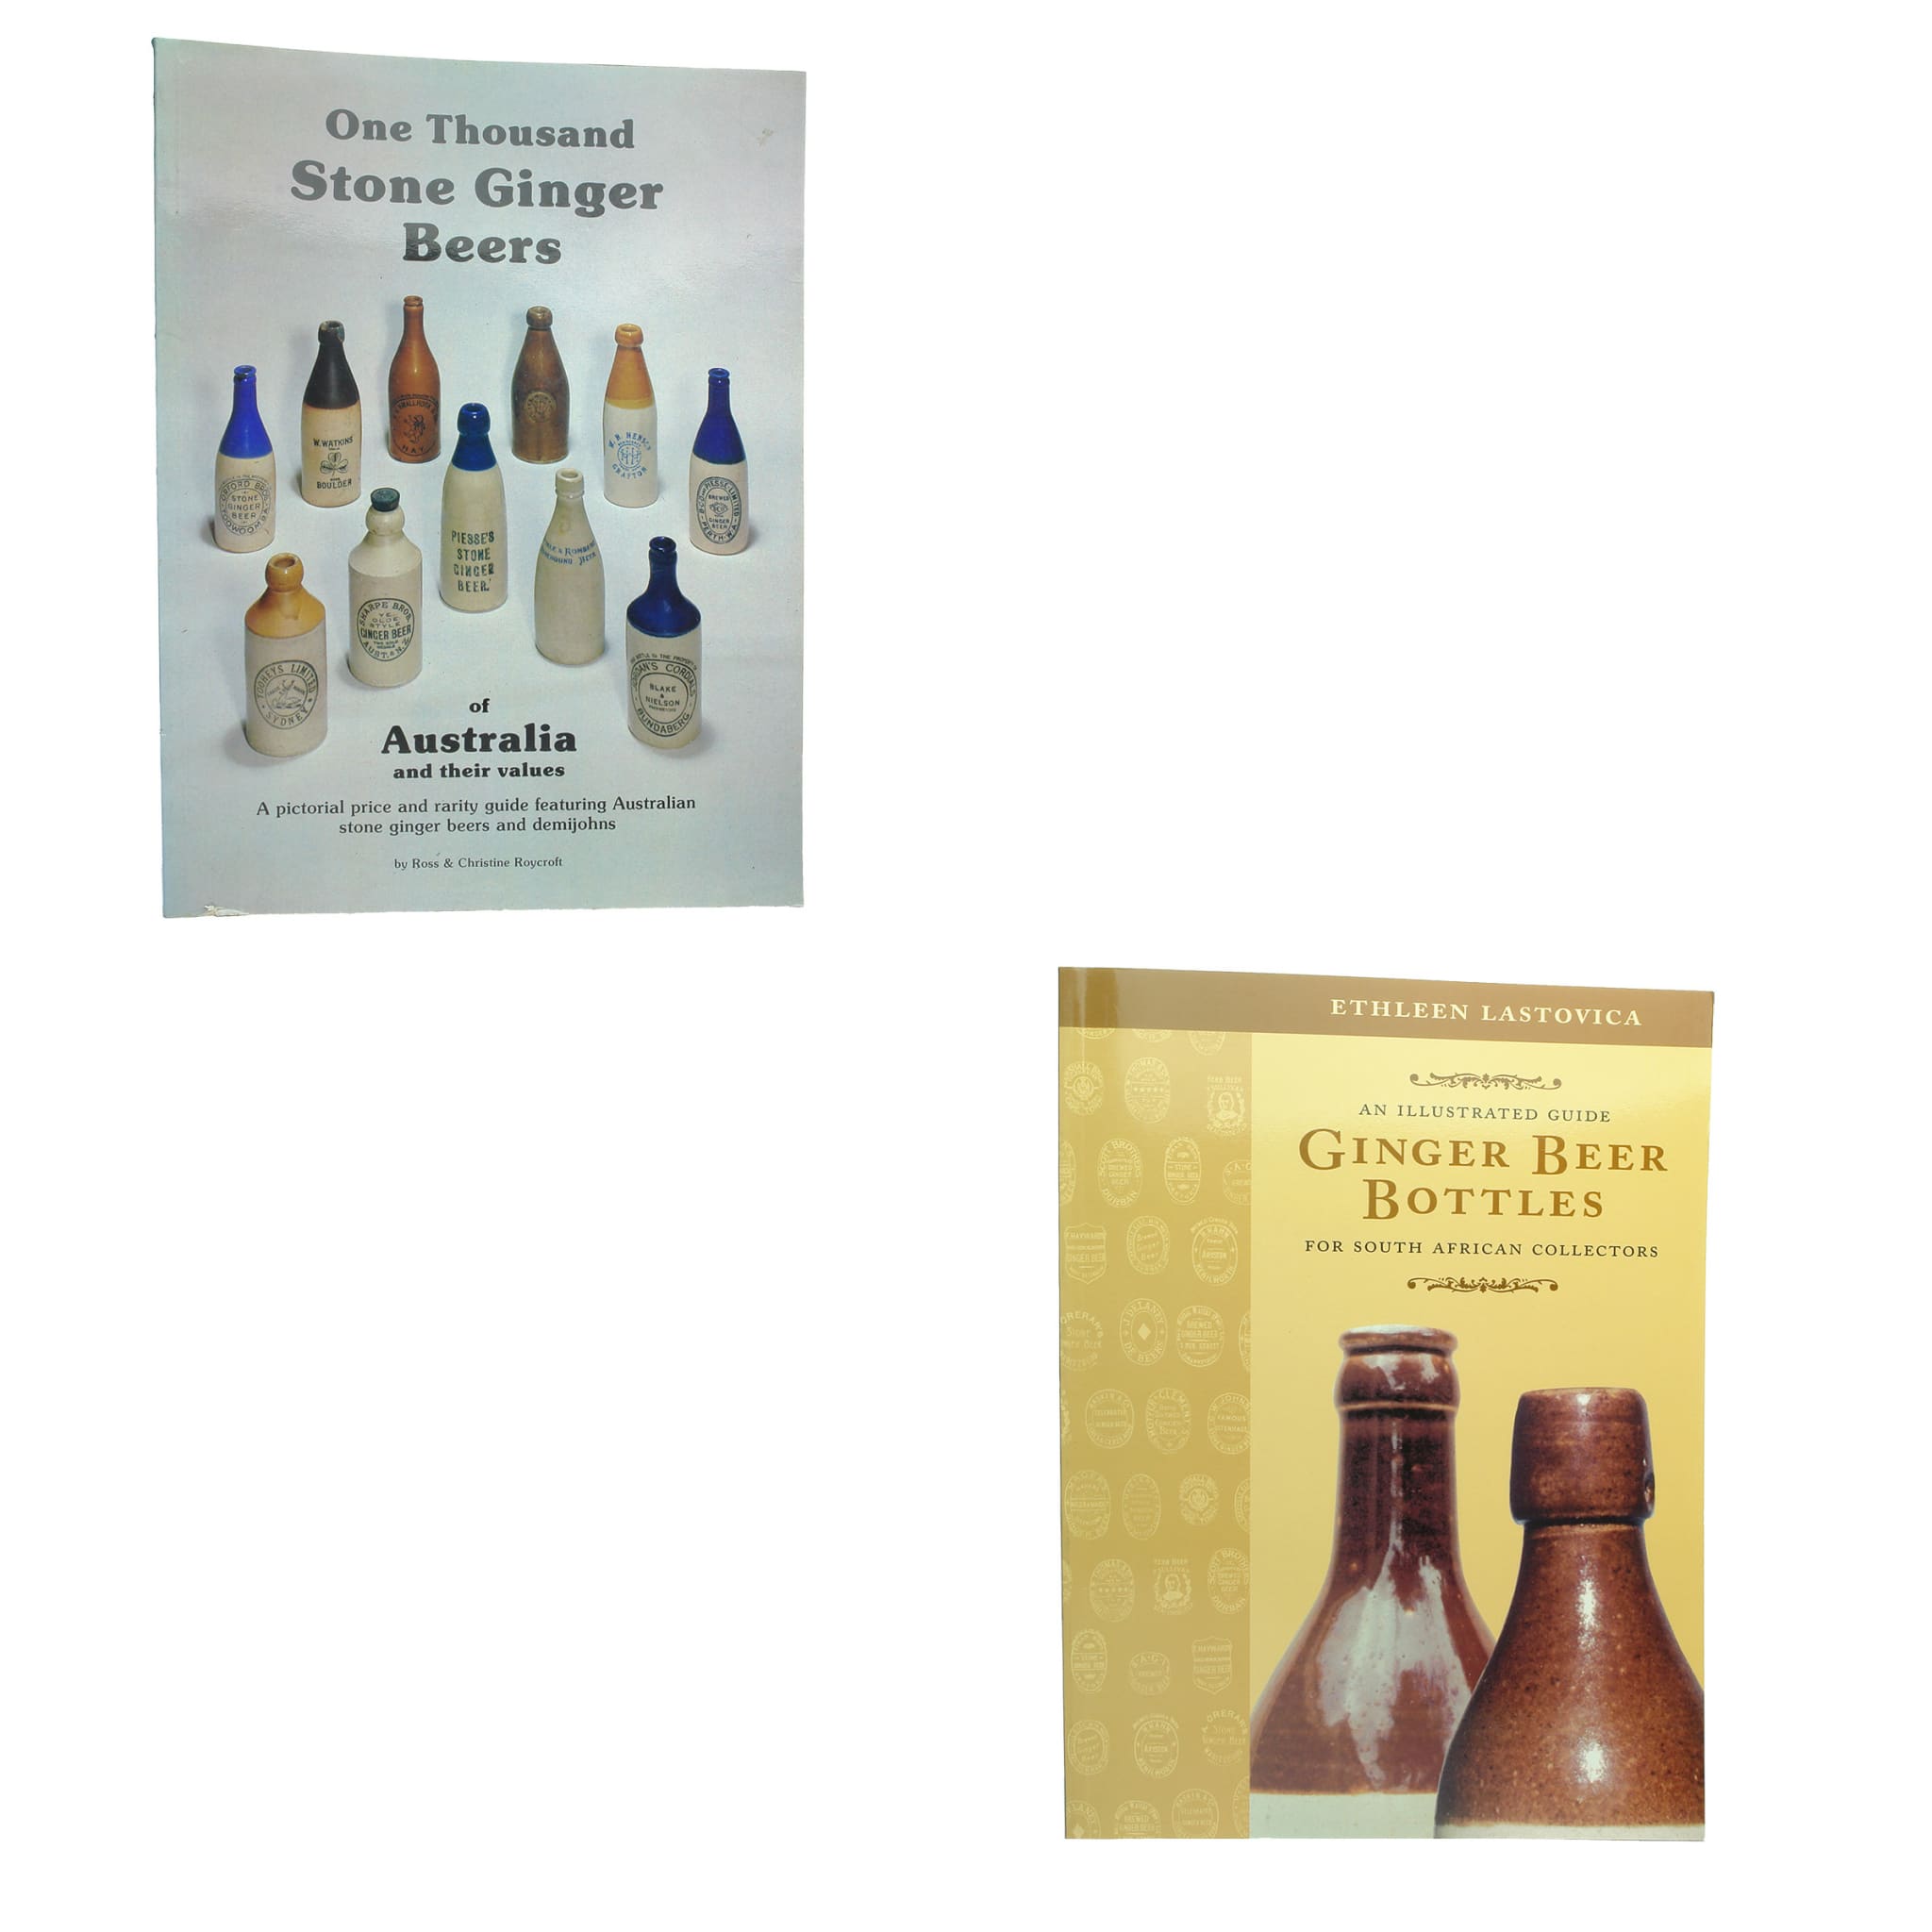 2 Books. One Thousand Stone Ginger Beers of Australia and their values, by Ross & Christine Roycroft, 1983. and Ginger Beer Bottles for South African Collectors, by Ethleen Lastovica, 2000.